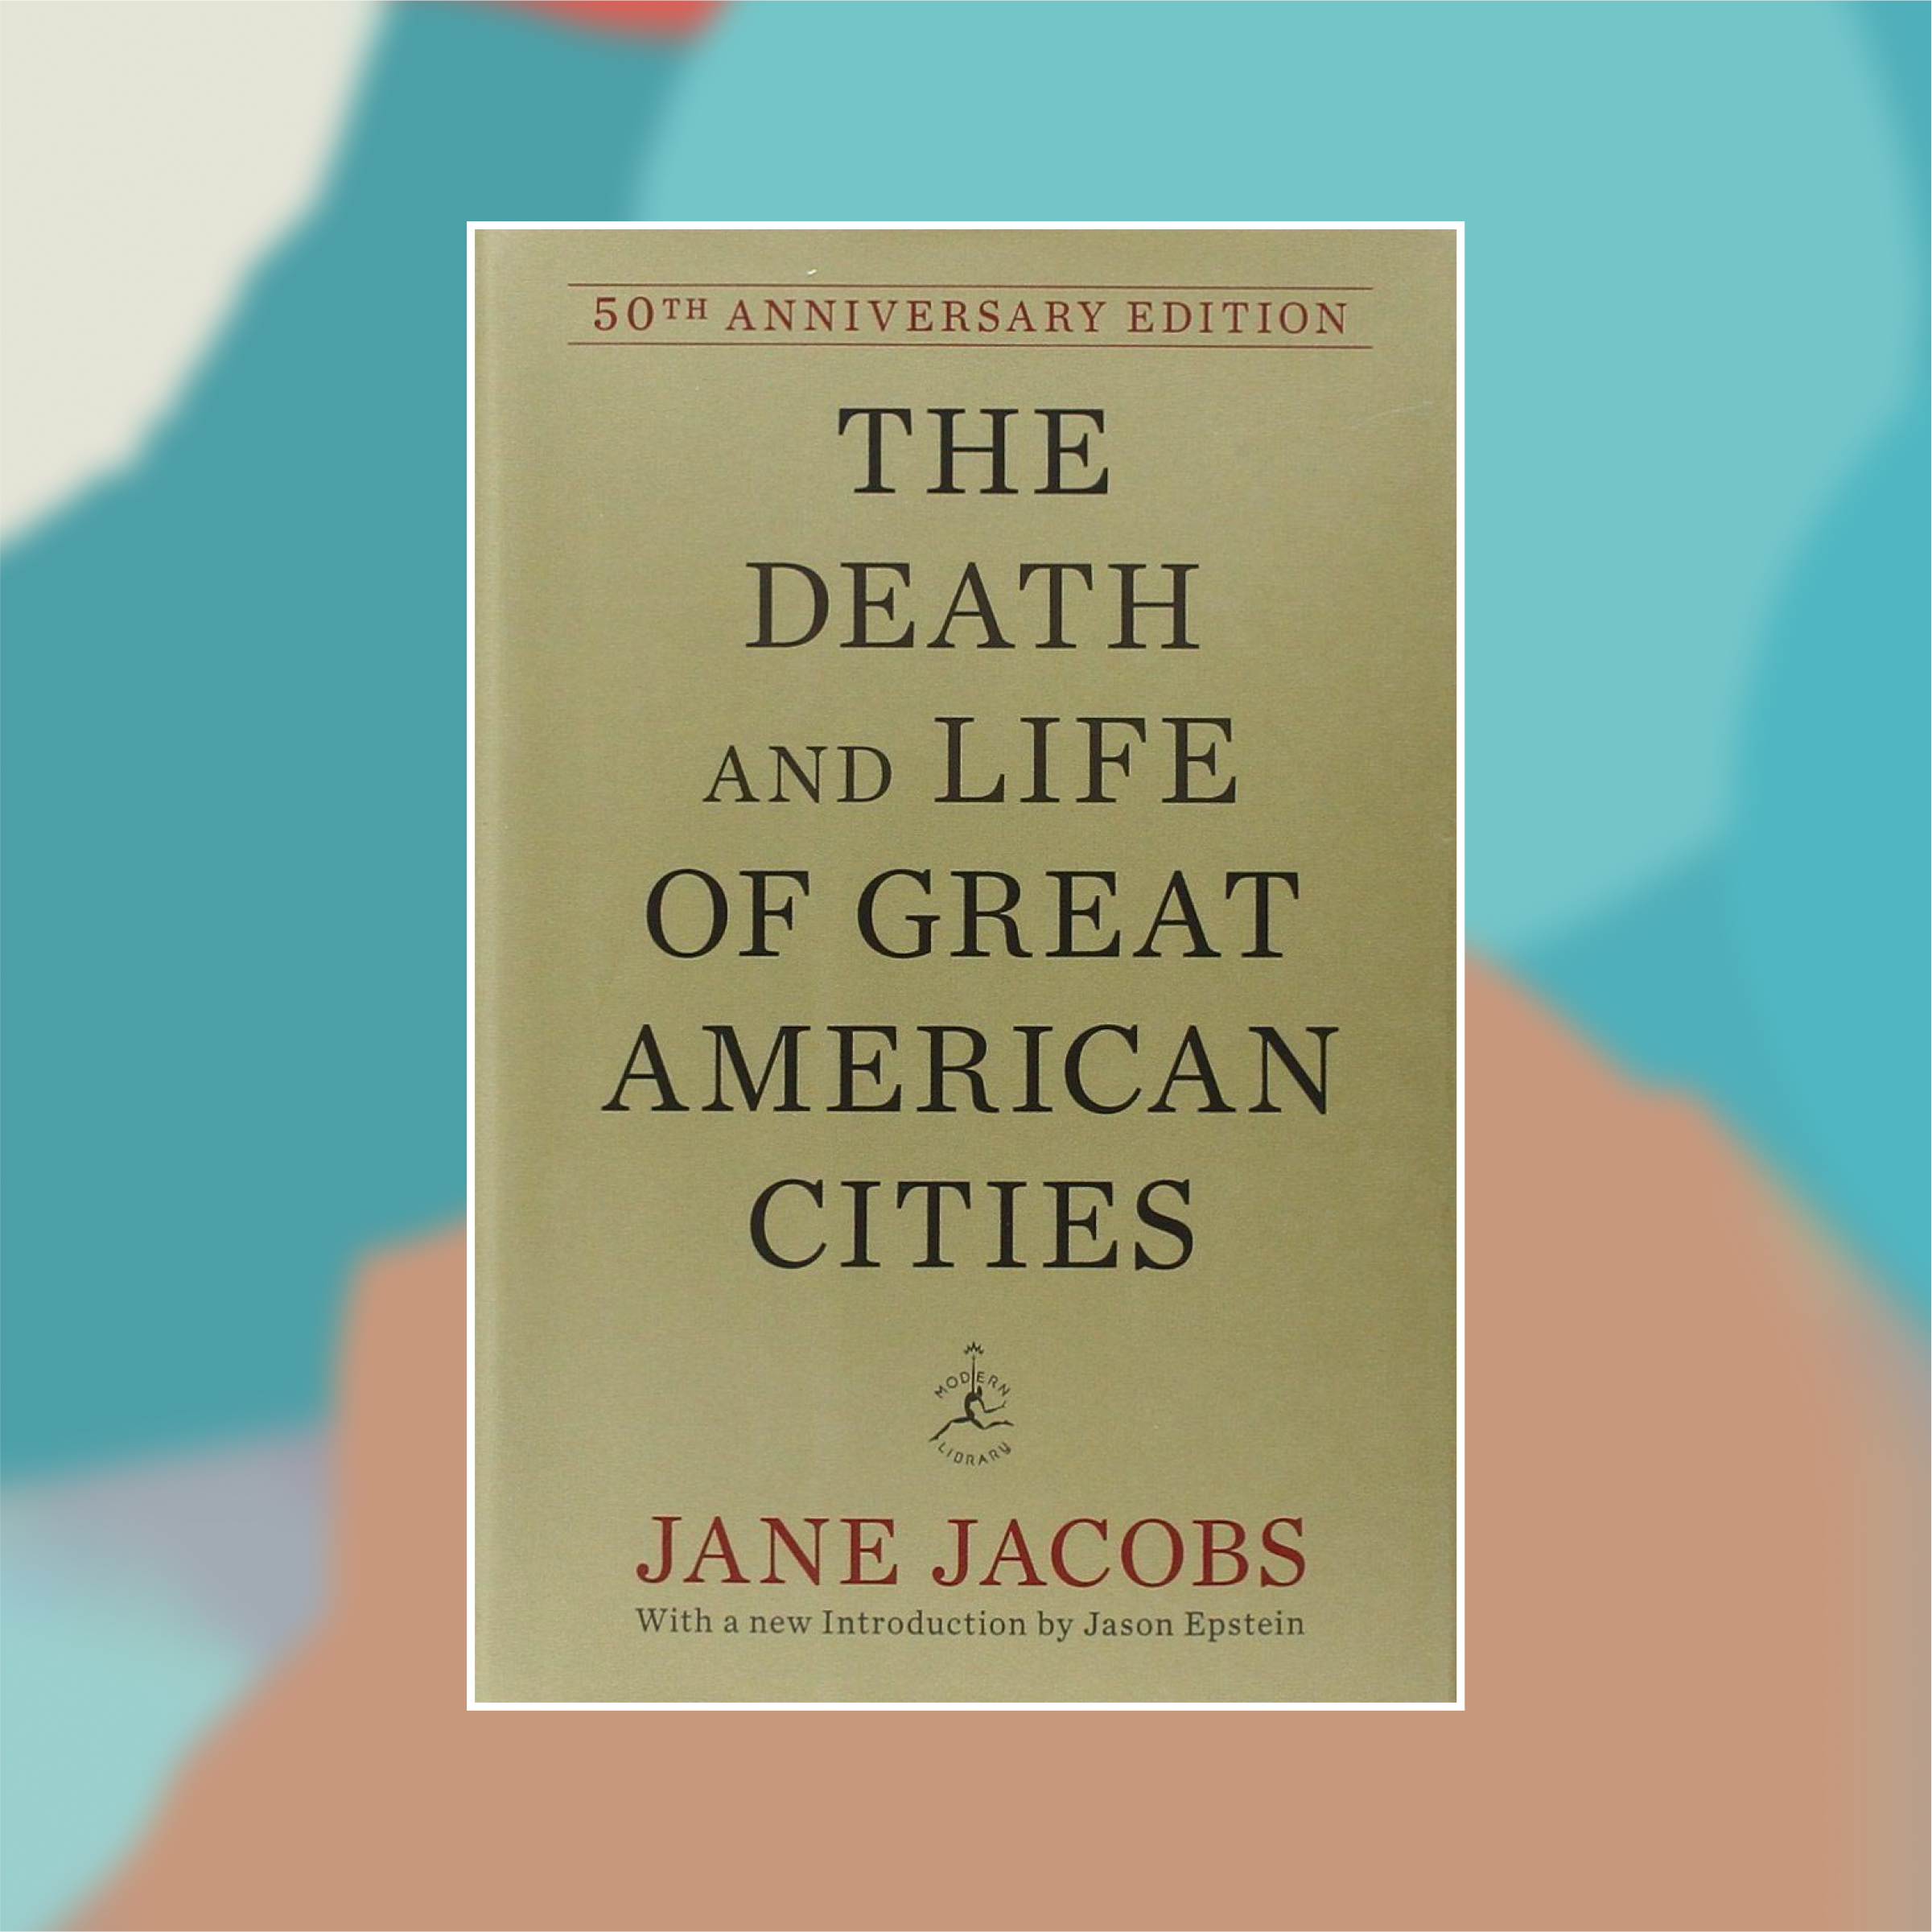 Book cover of Death and Life of American Cities against an abstract painted background